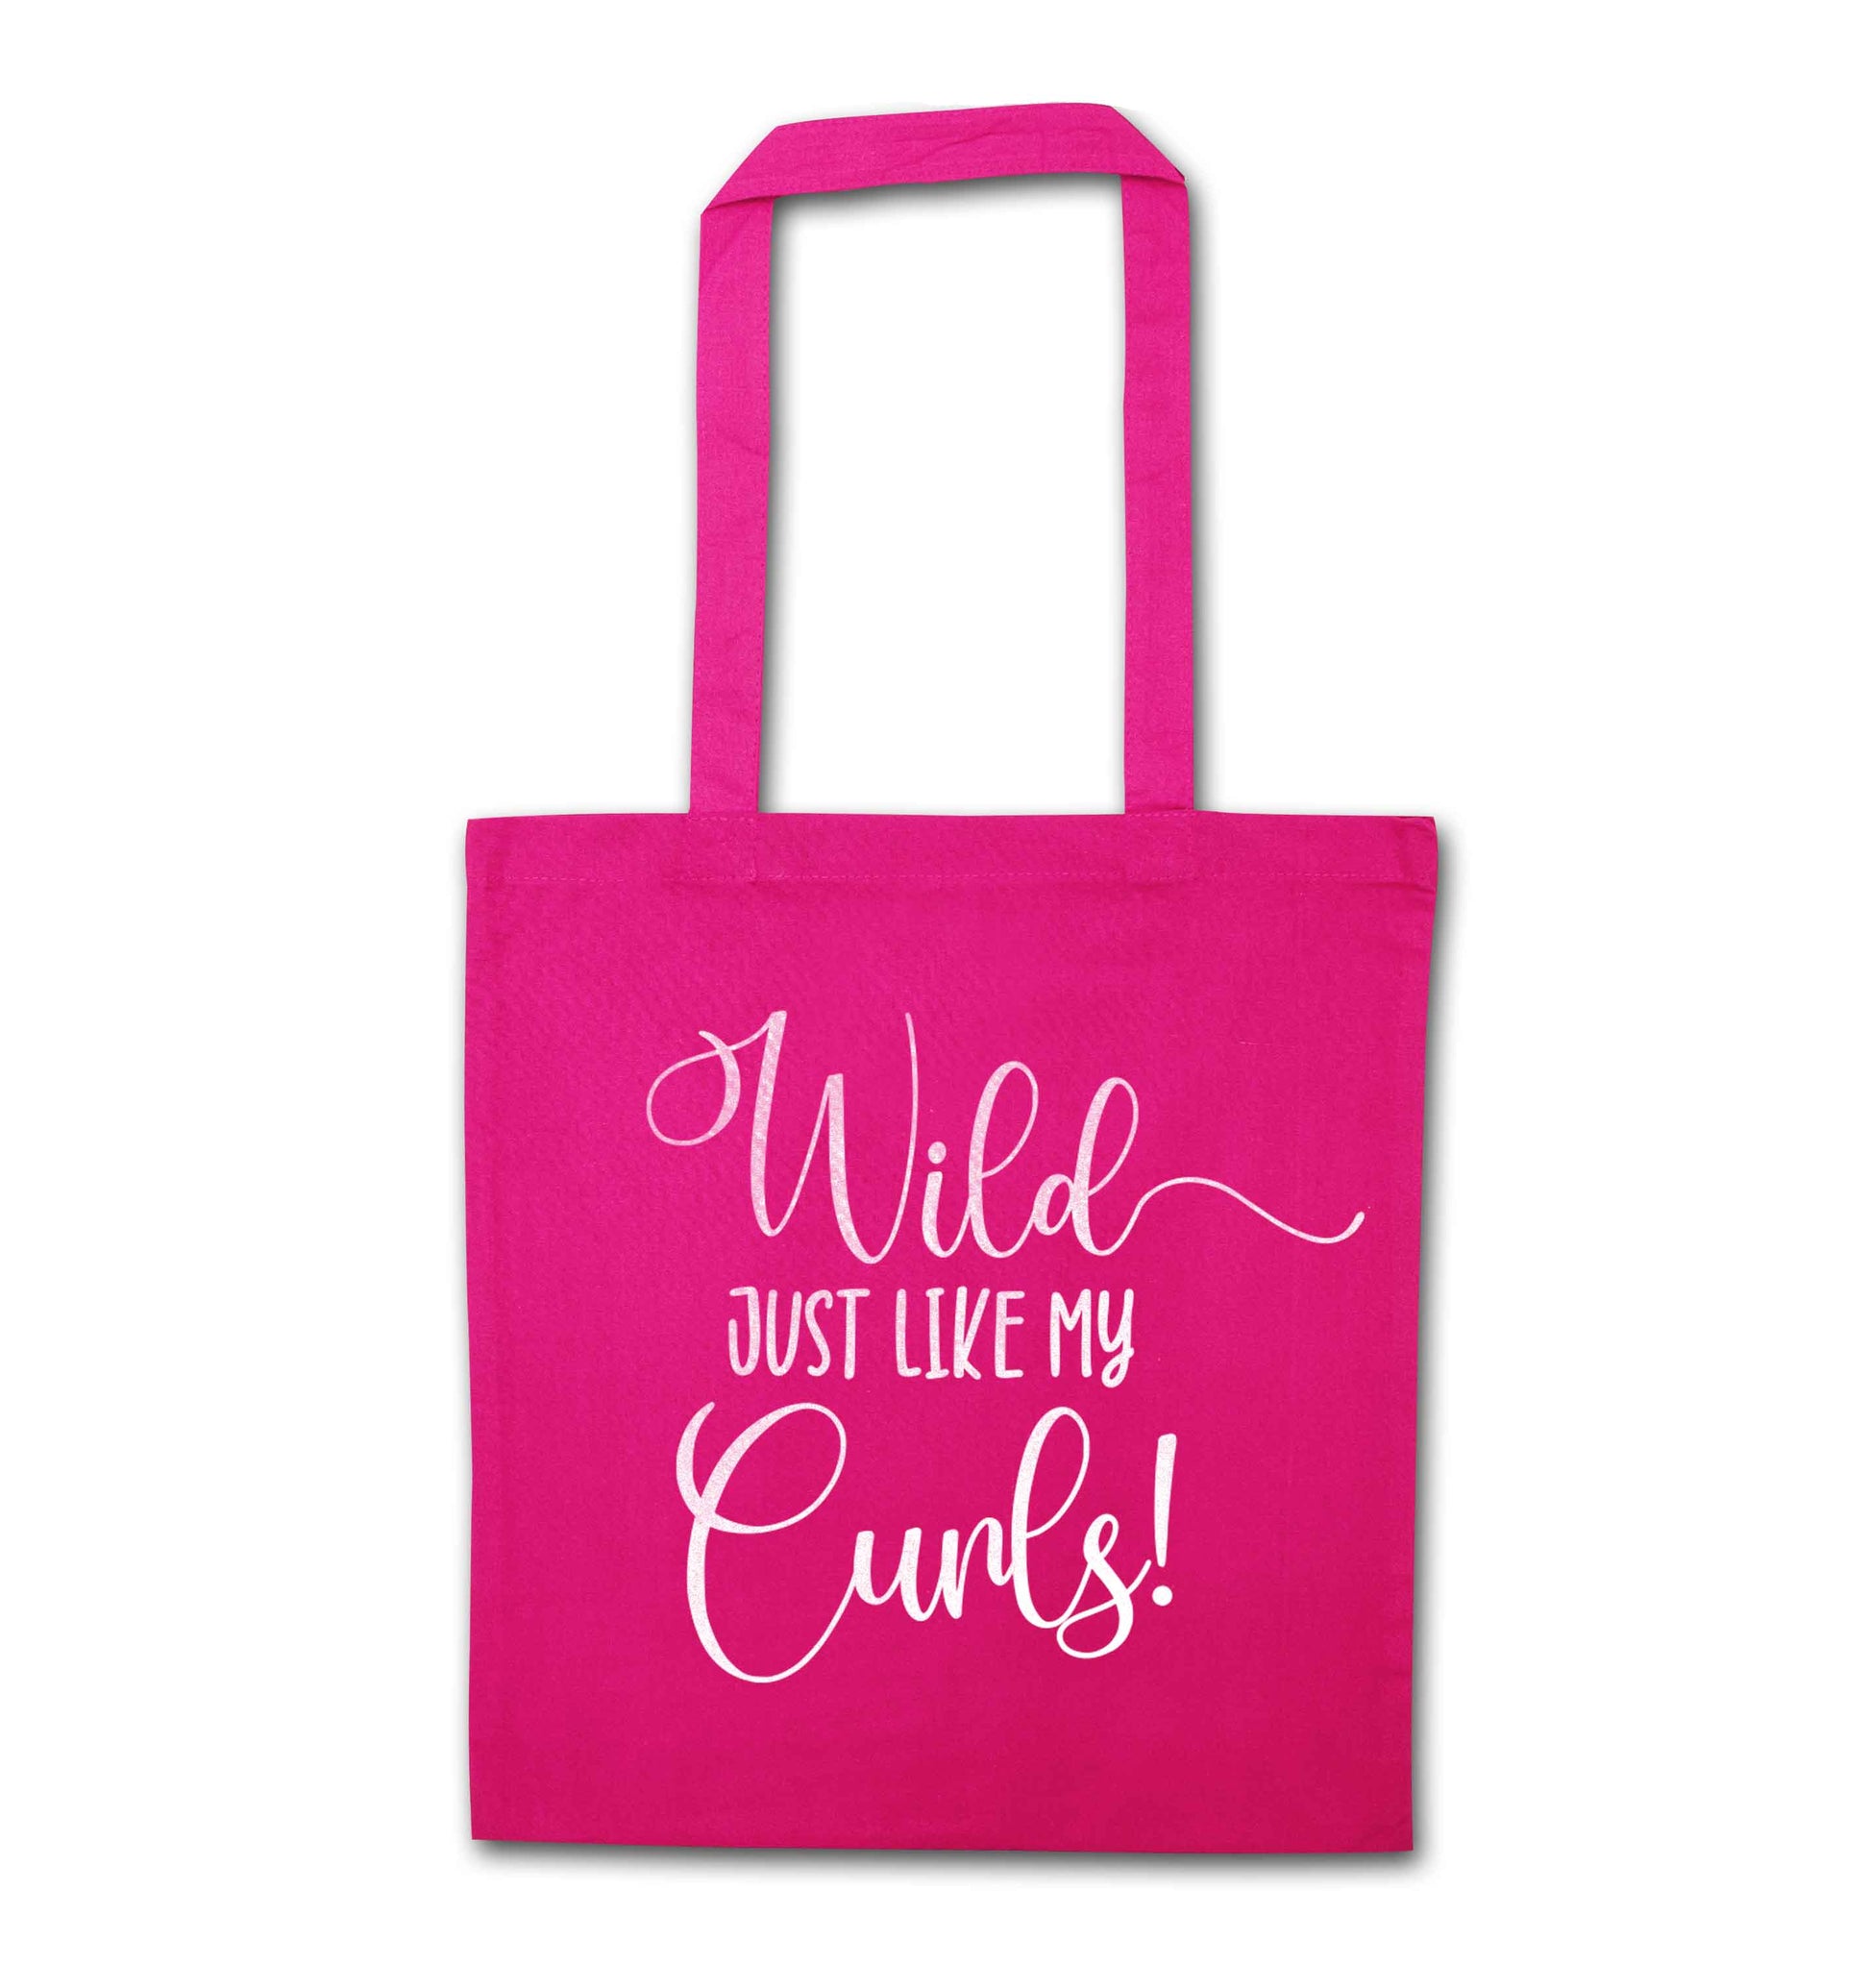 Wild just like my curls pink tote bag